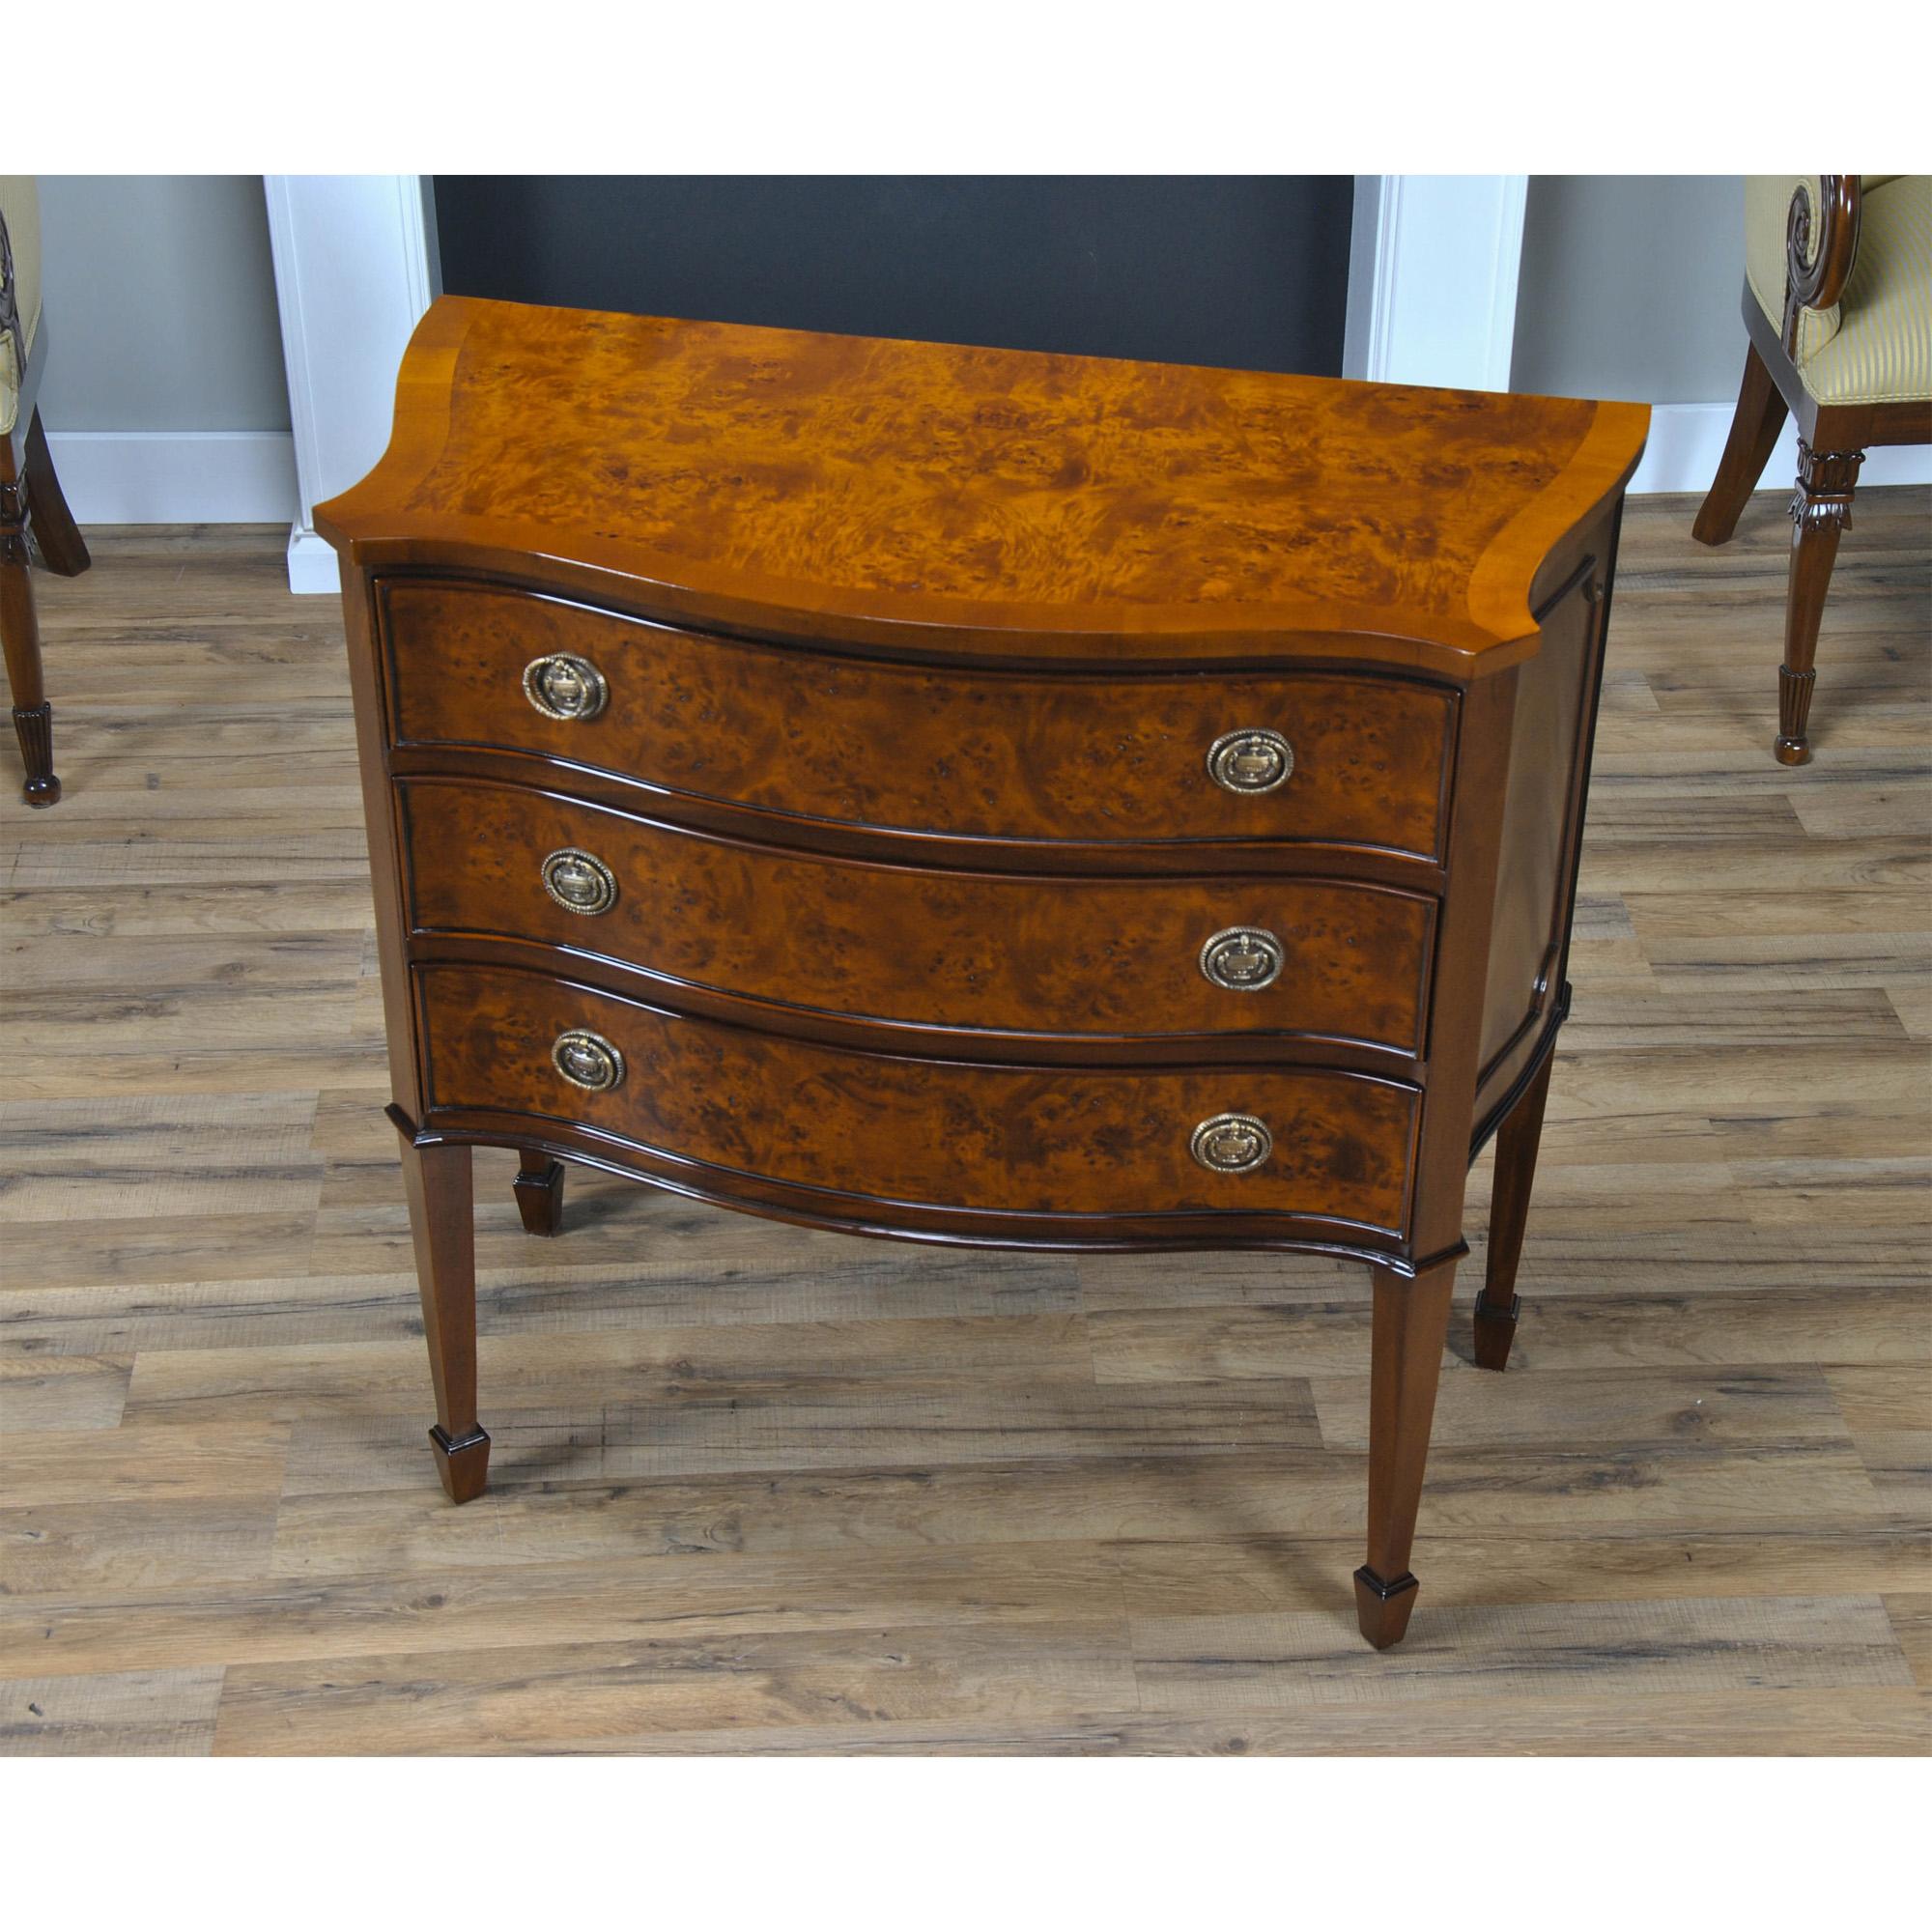 This high quality, serpentine front Large Burled Hepplewhite Chest with dovetailed drawers is manufactured using plantation grown mahogany solids and hand selected burled veneers all of which are combined to create a decorative and refined chest.